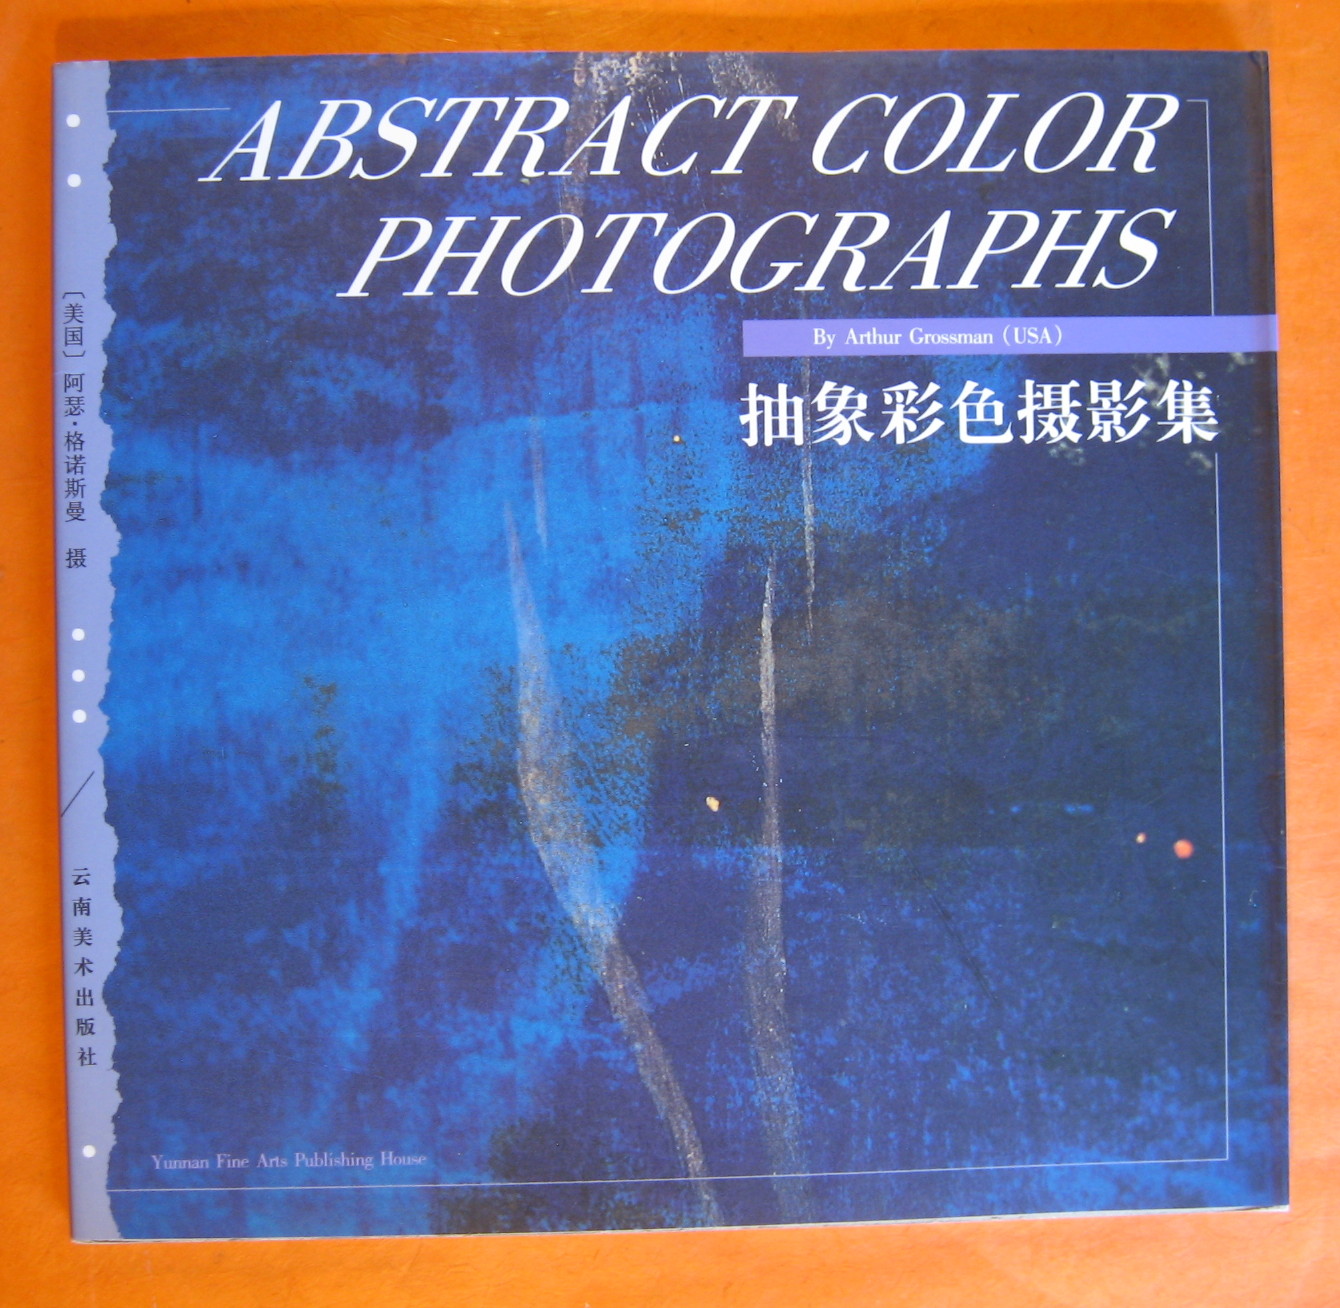 Image for Abstract Color Photographs By Arthur Grossman (USA)